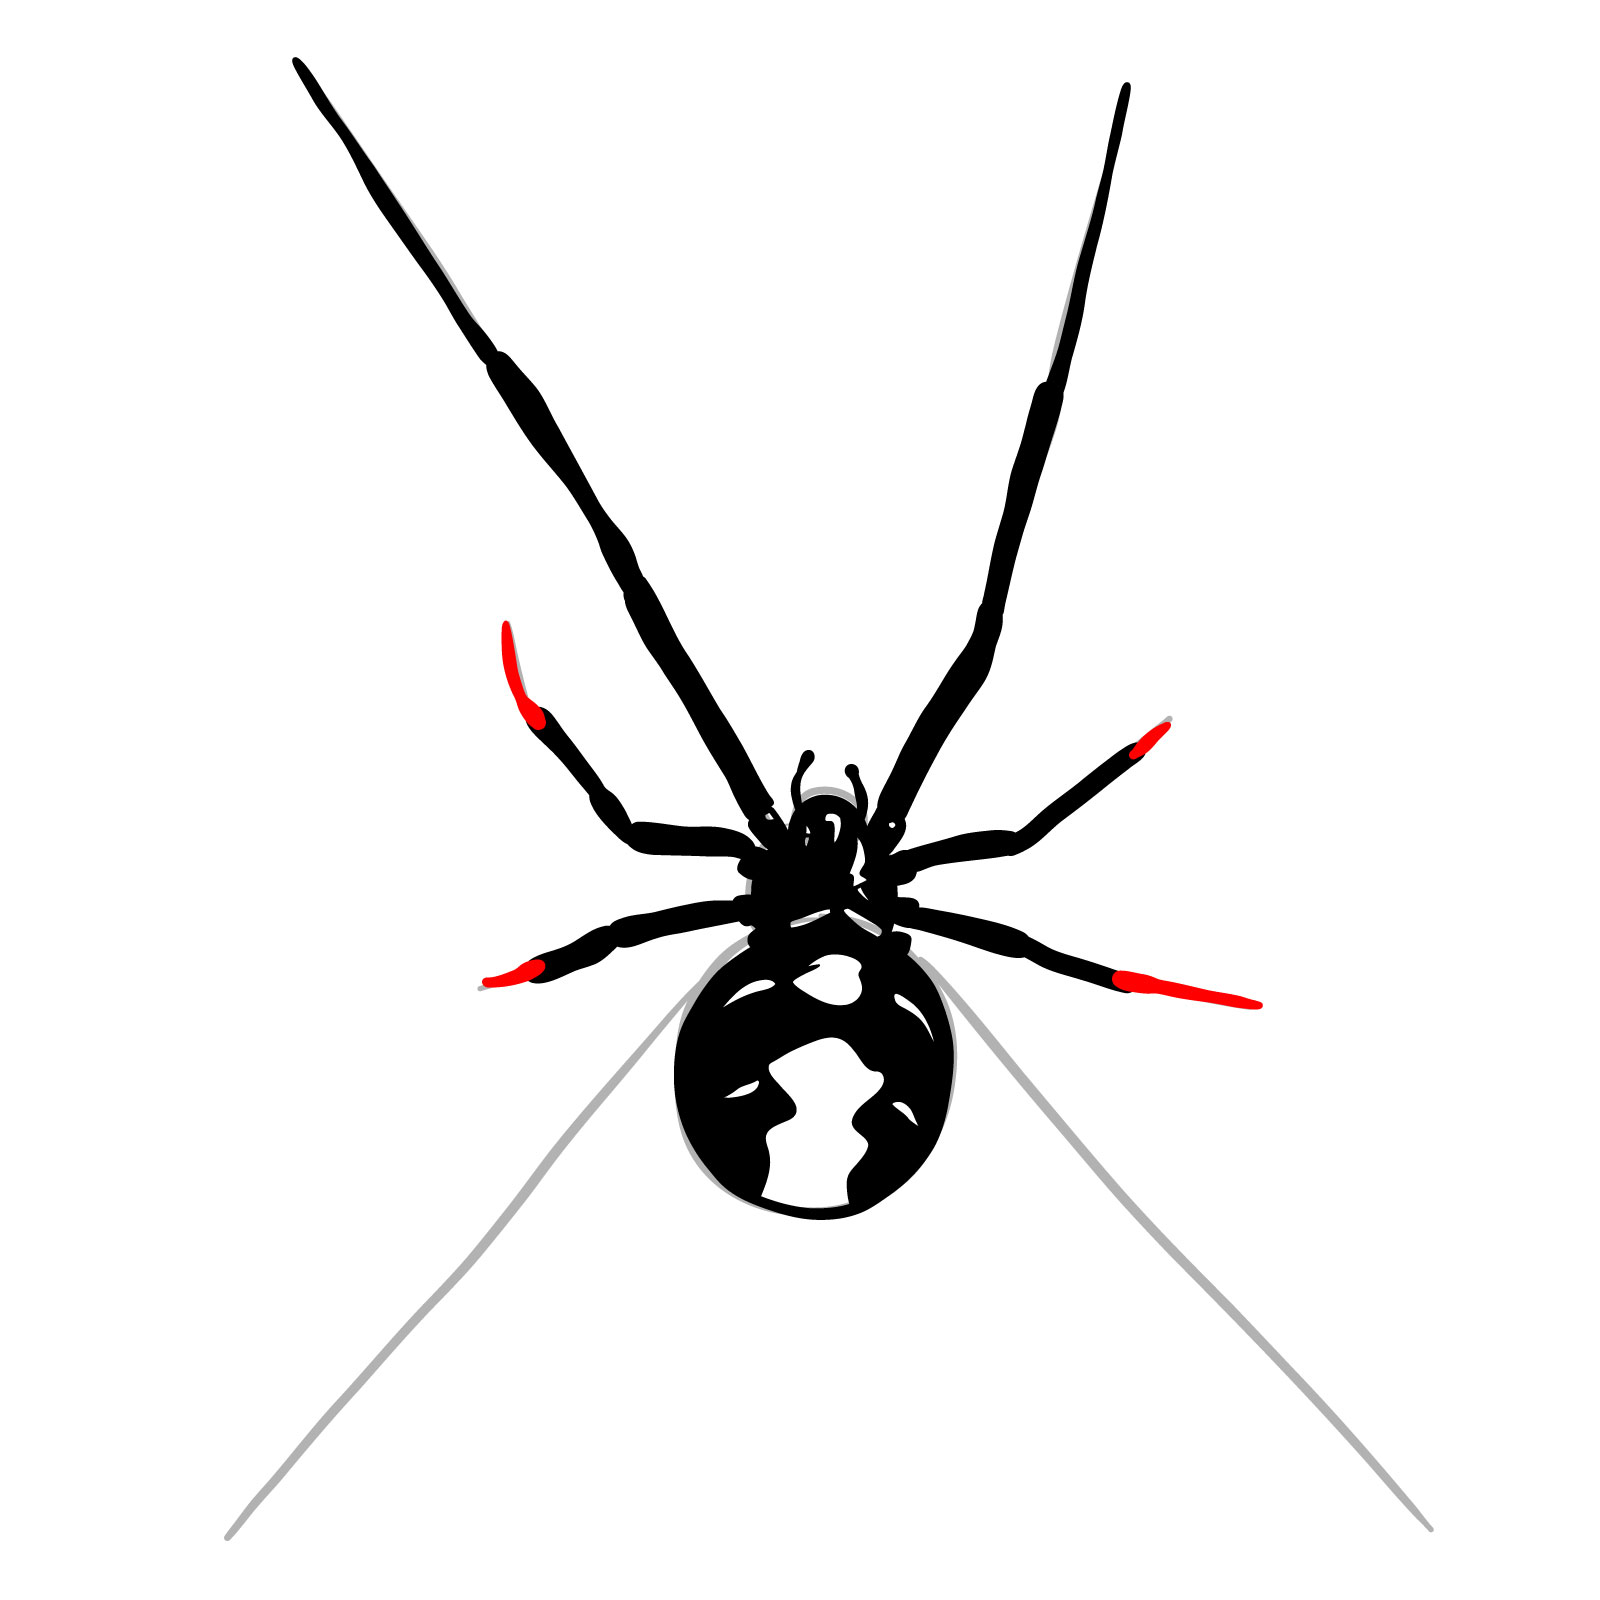 How to draw a Black Widow Spider - step 16